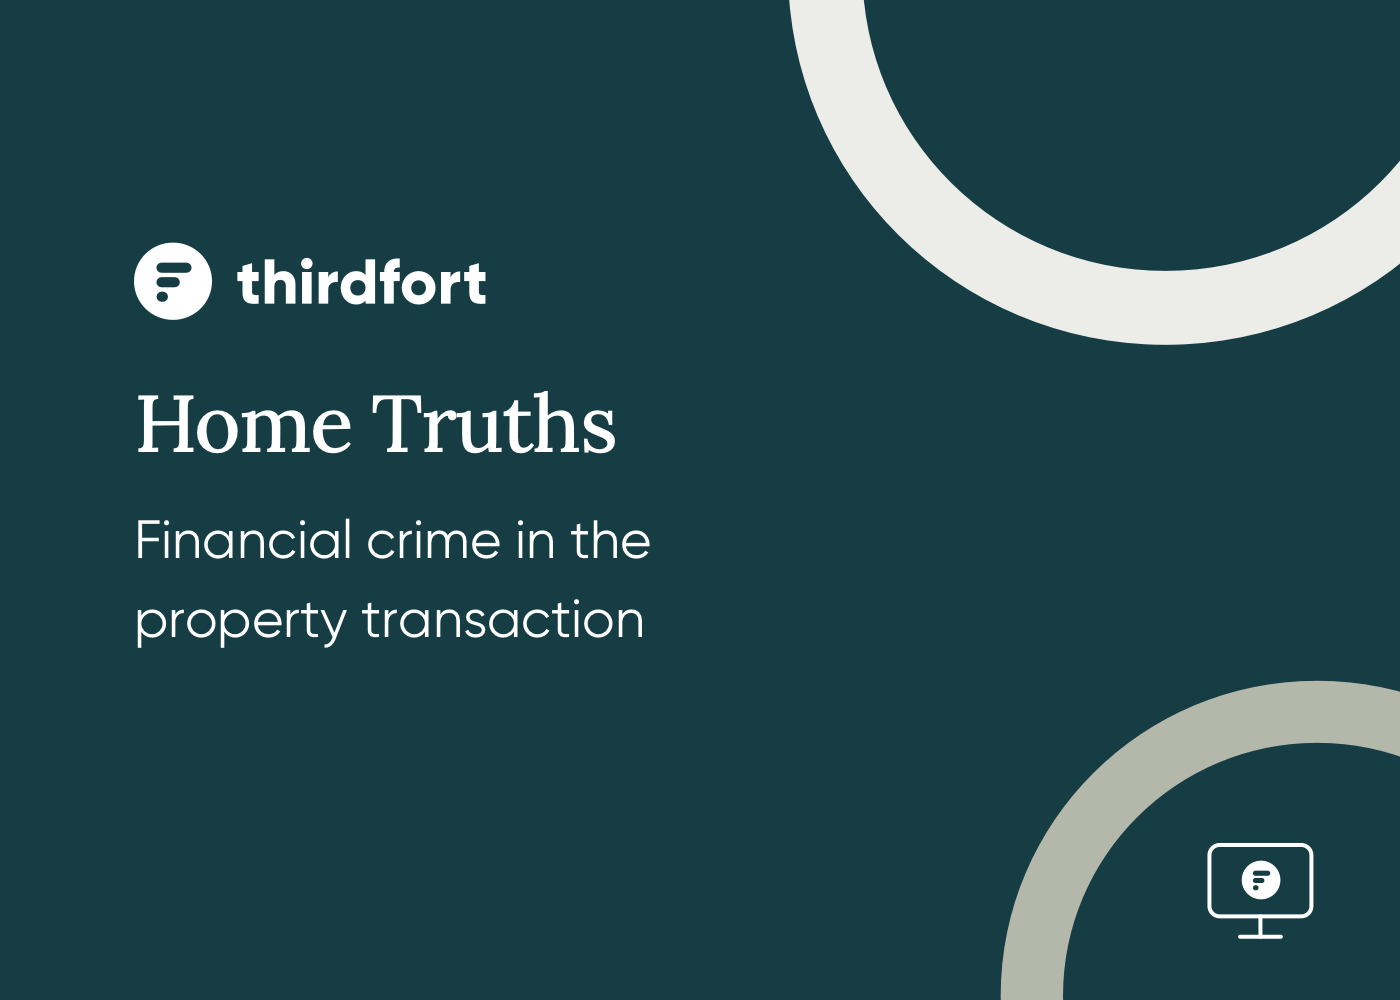 A Thirdfort webinar with title "Home Truths"